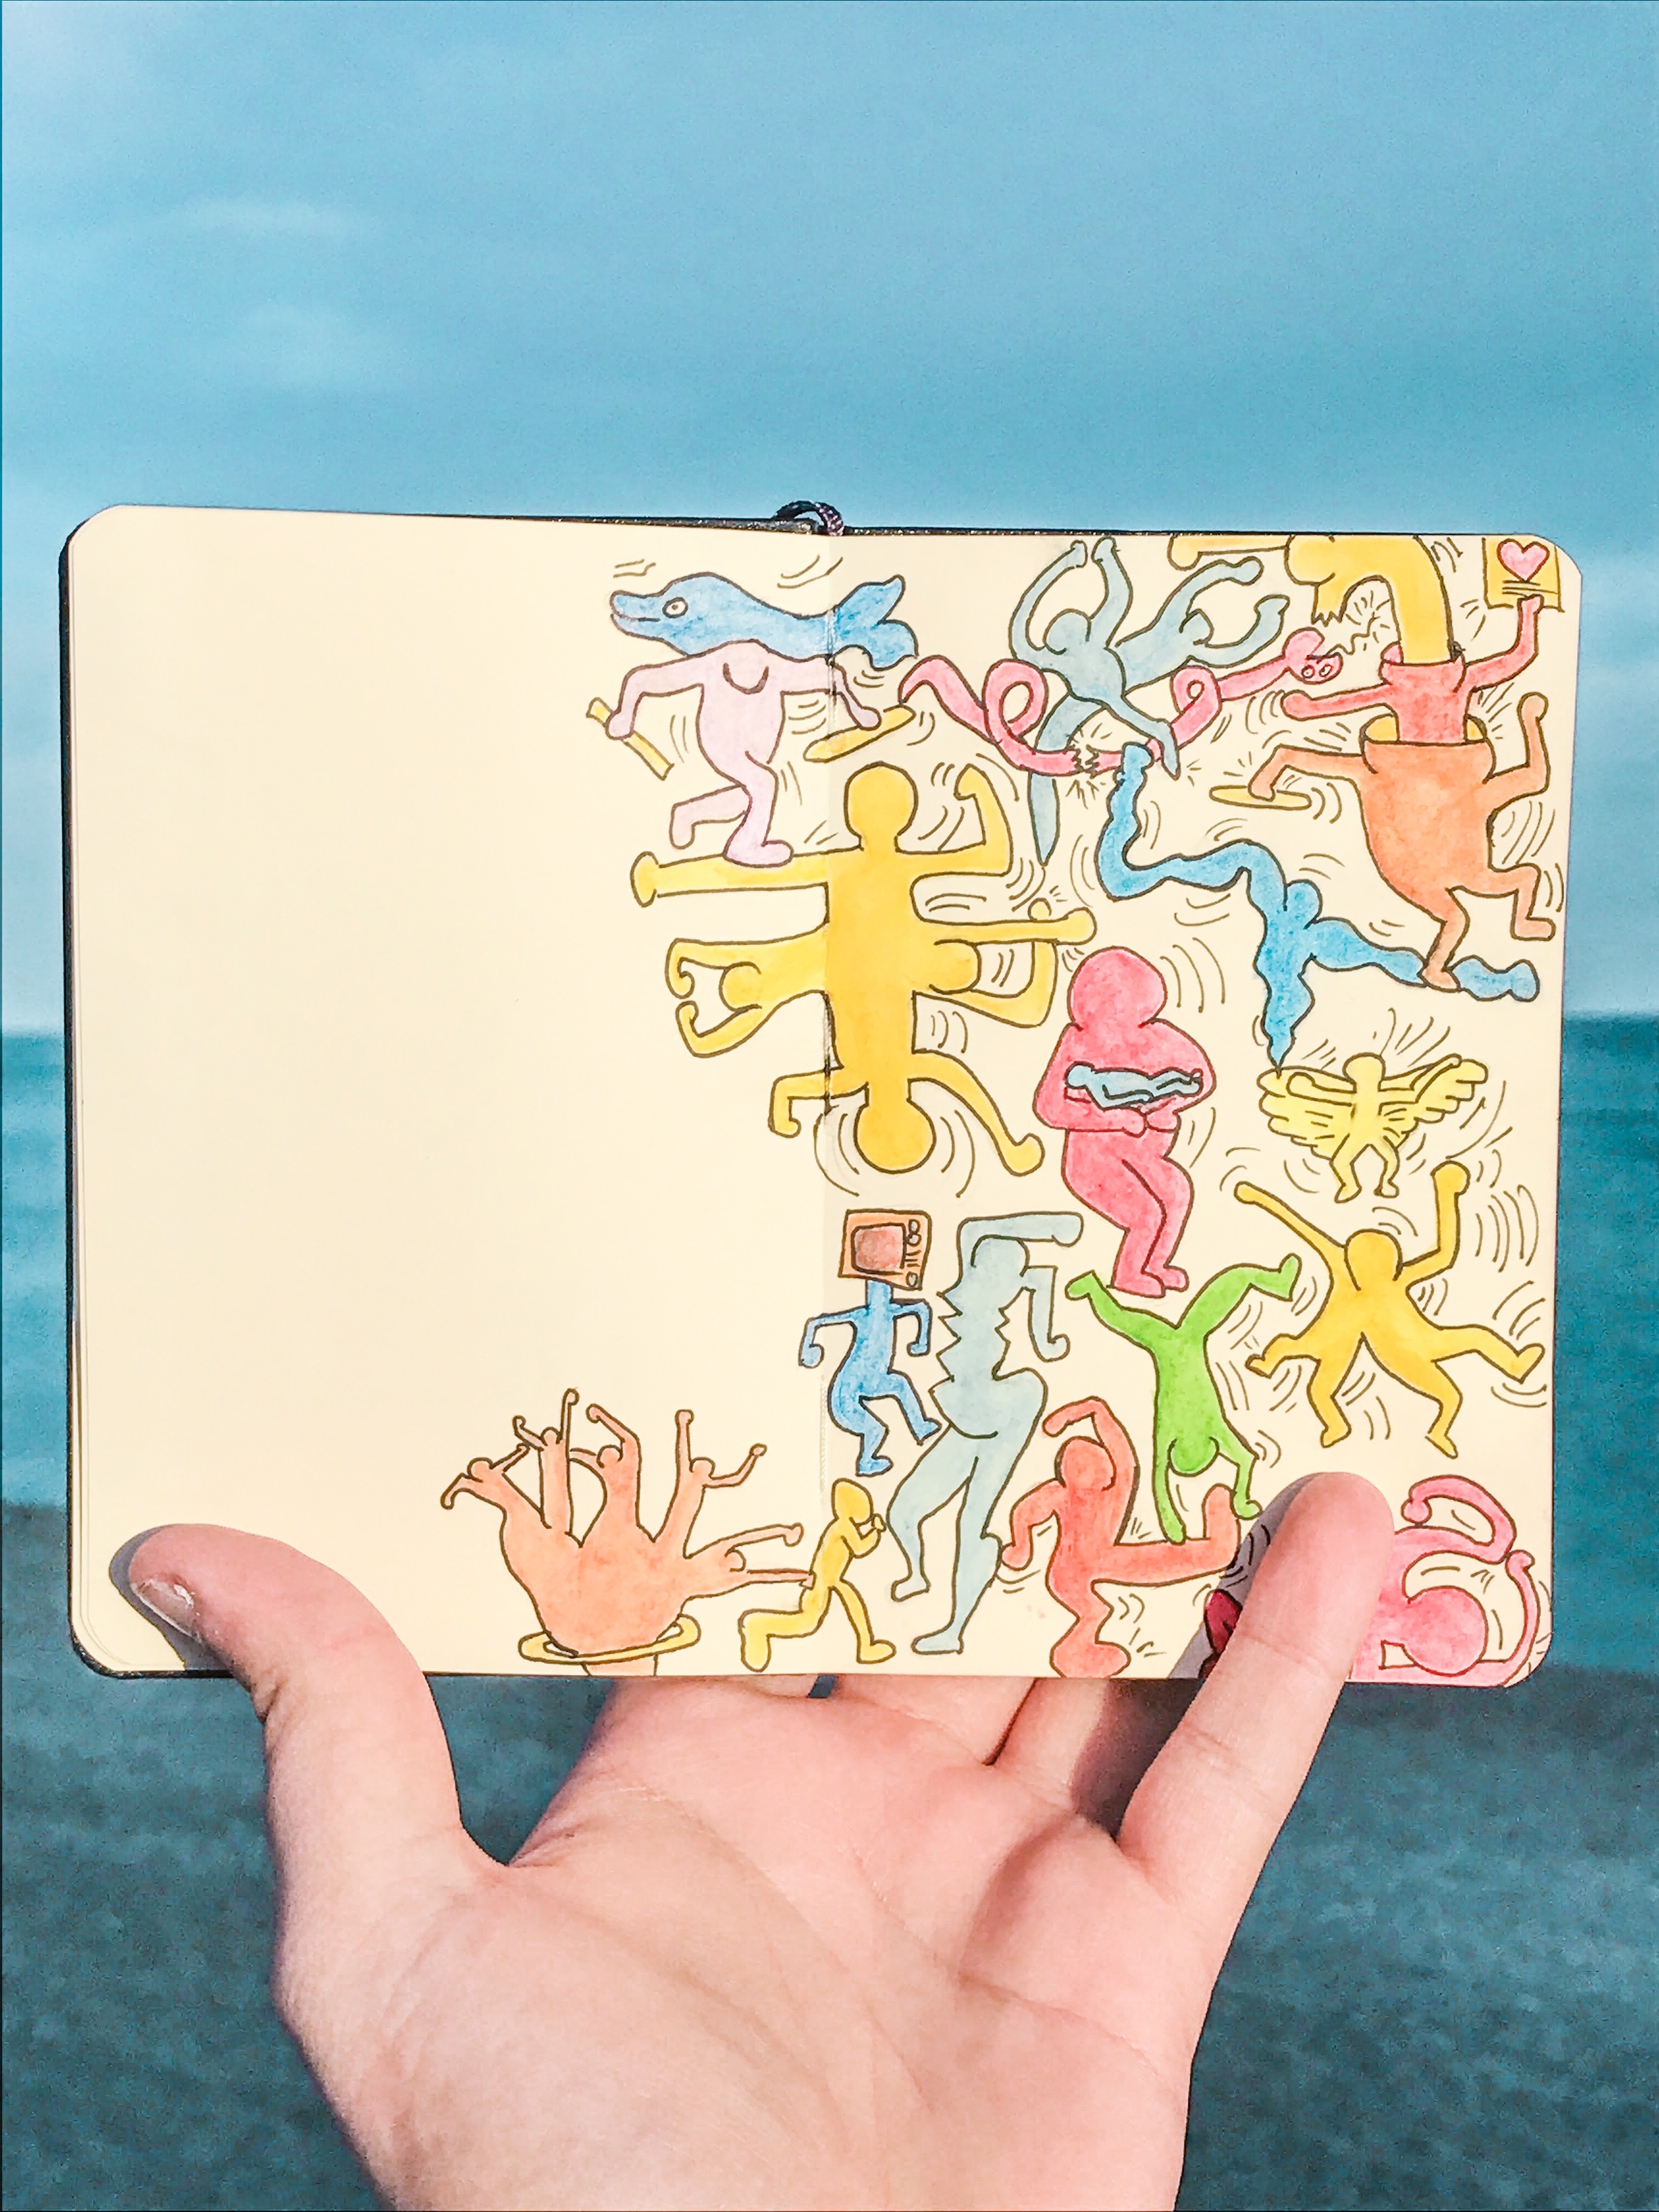 Haring on the sea